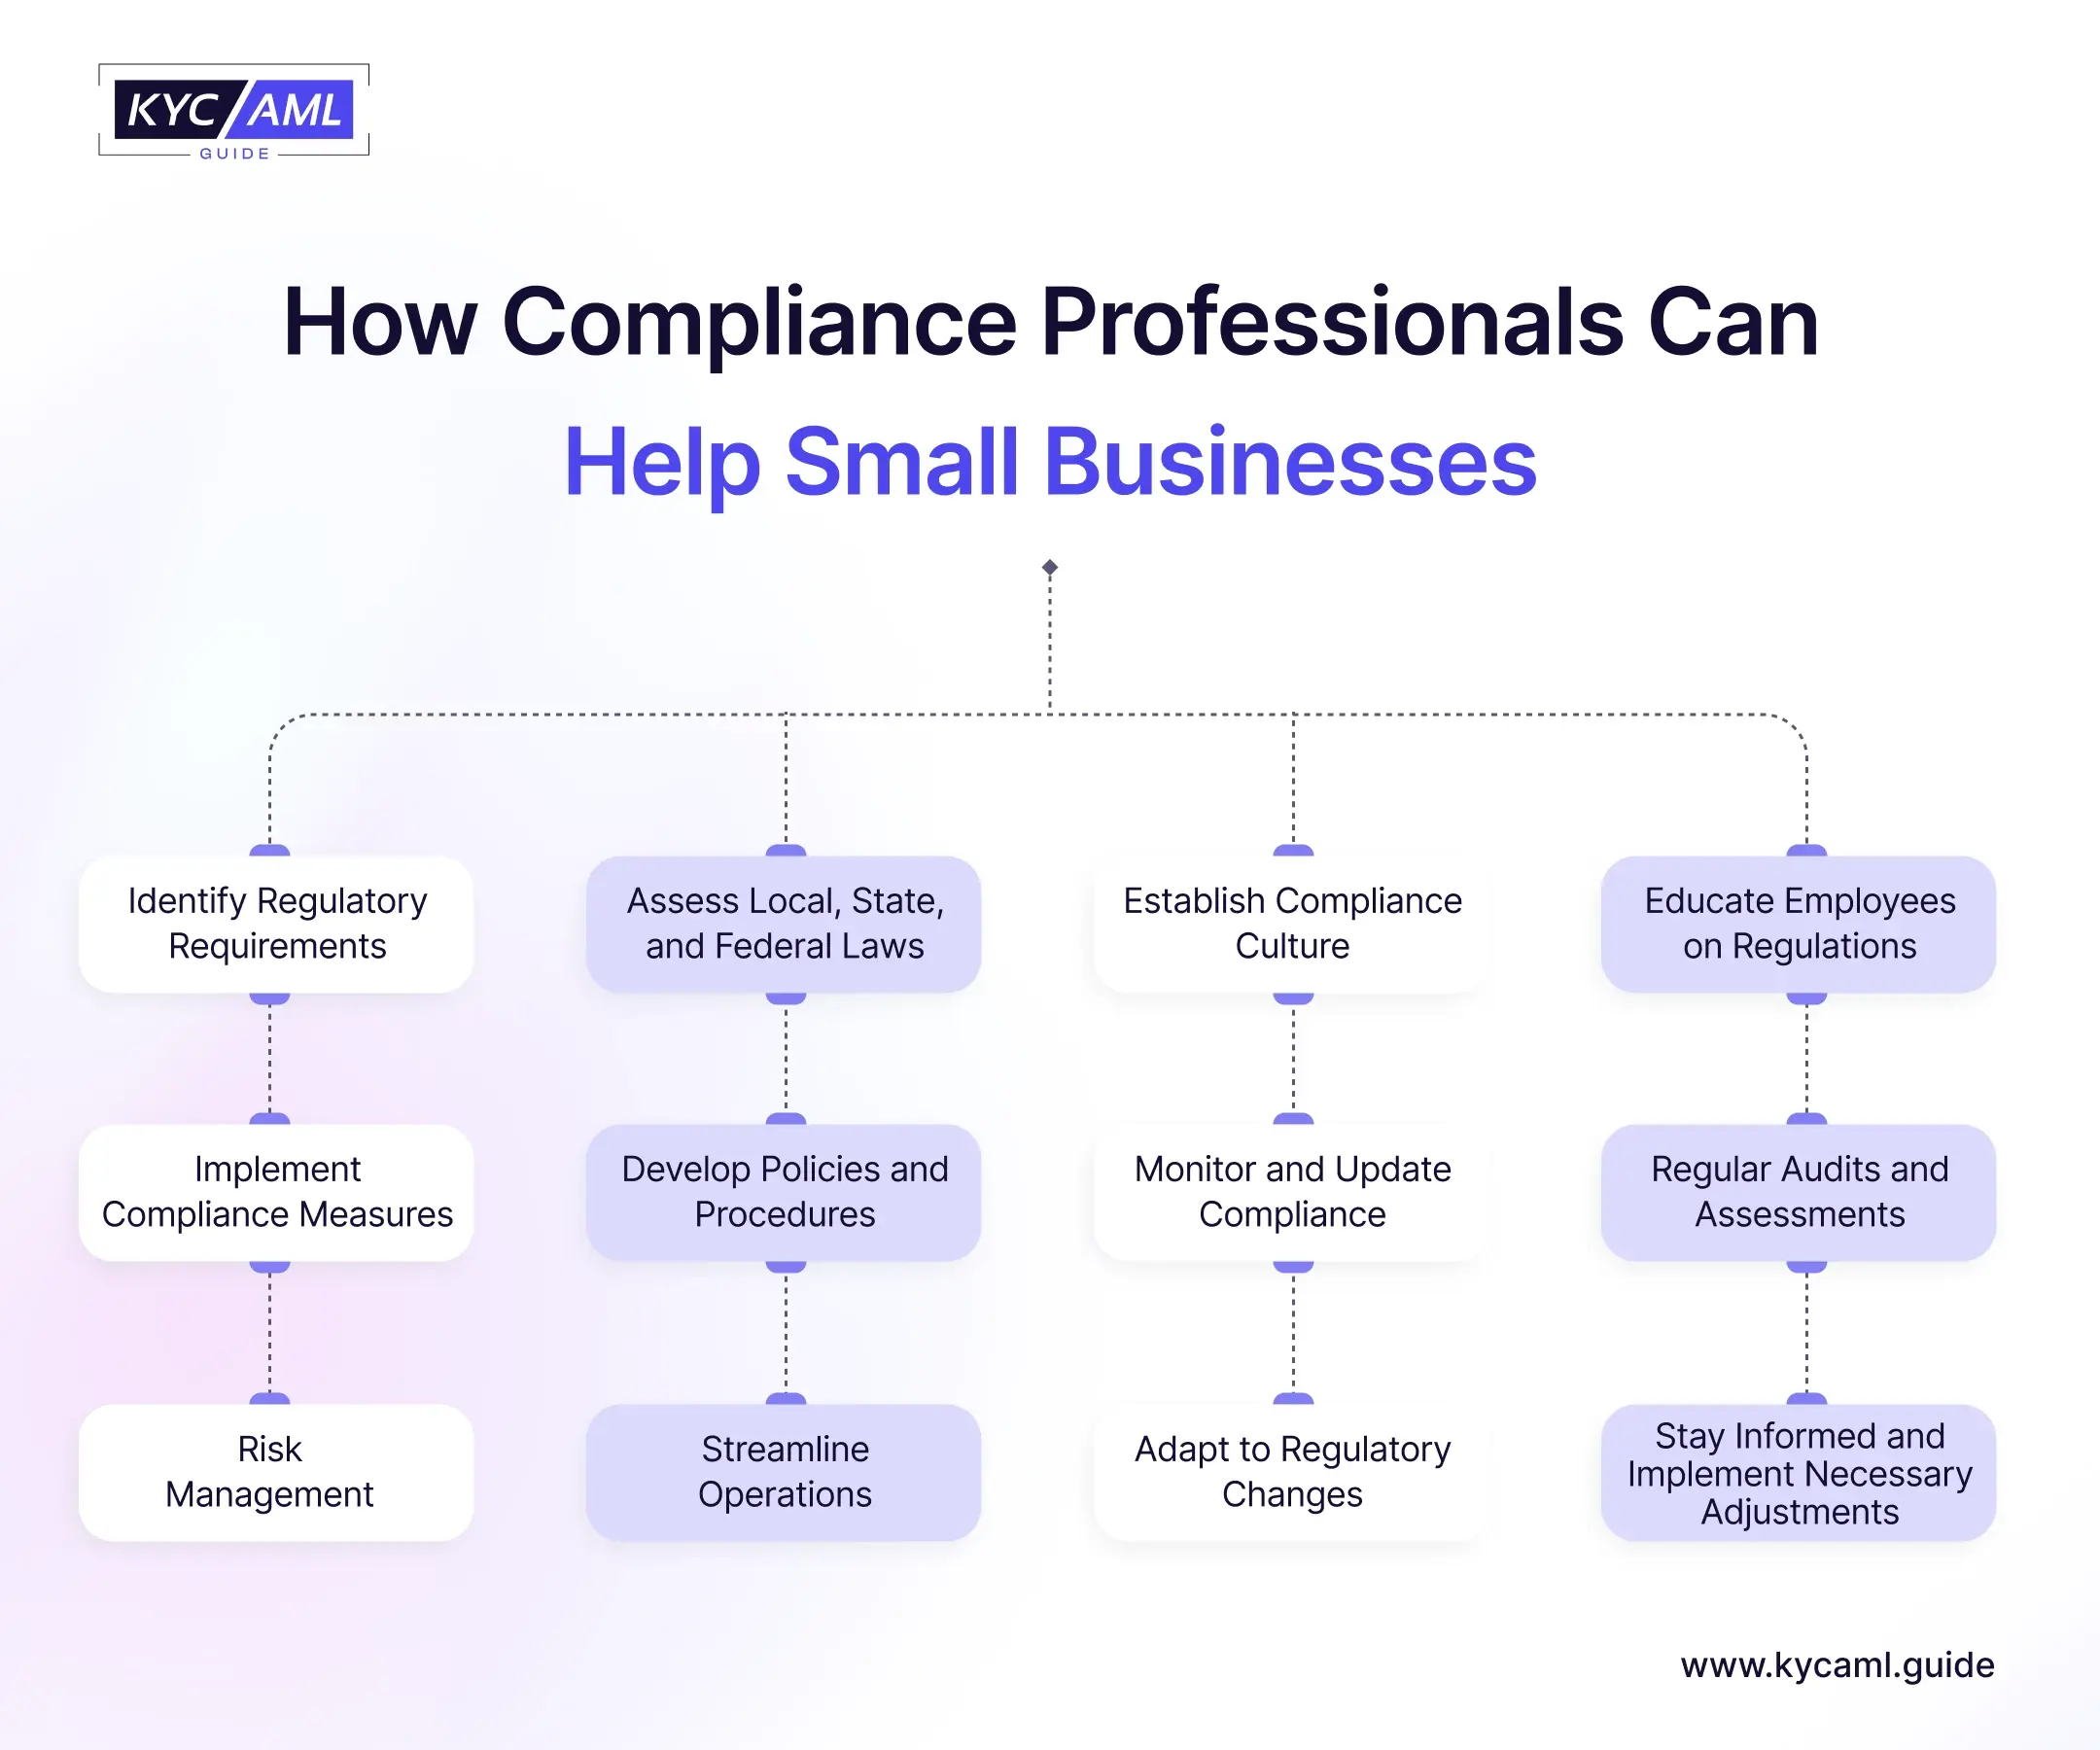 This chart shows the sequential steps of how compliance professionals can help small businesses thrive. These steps include identifying regulatory compliance, managing risks, streamlining operations, and adapting to regulatory changes. 